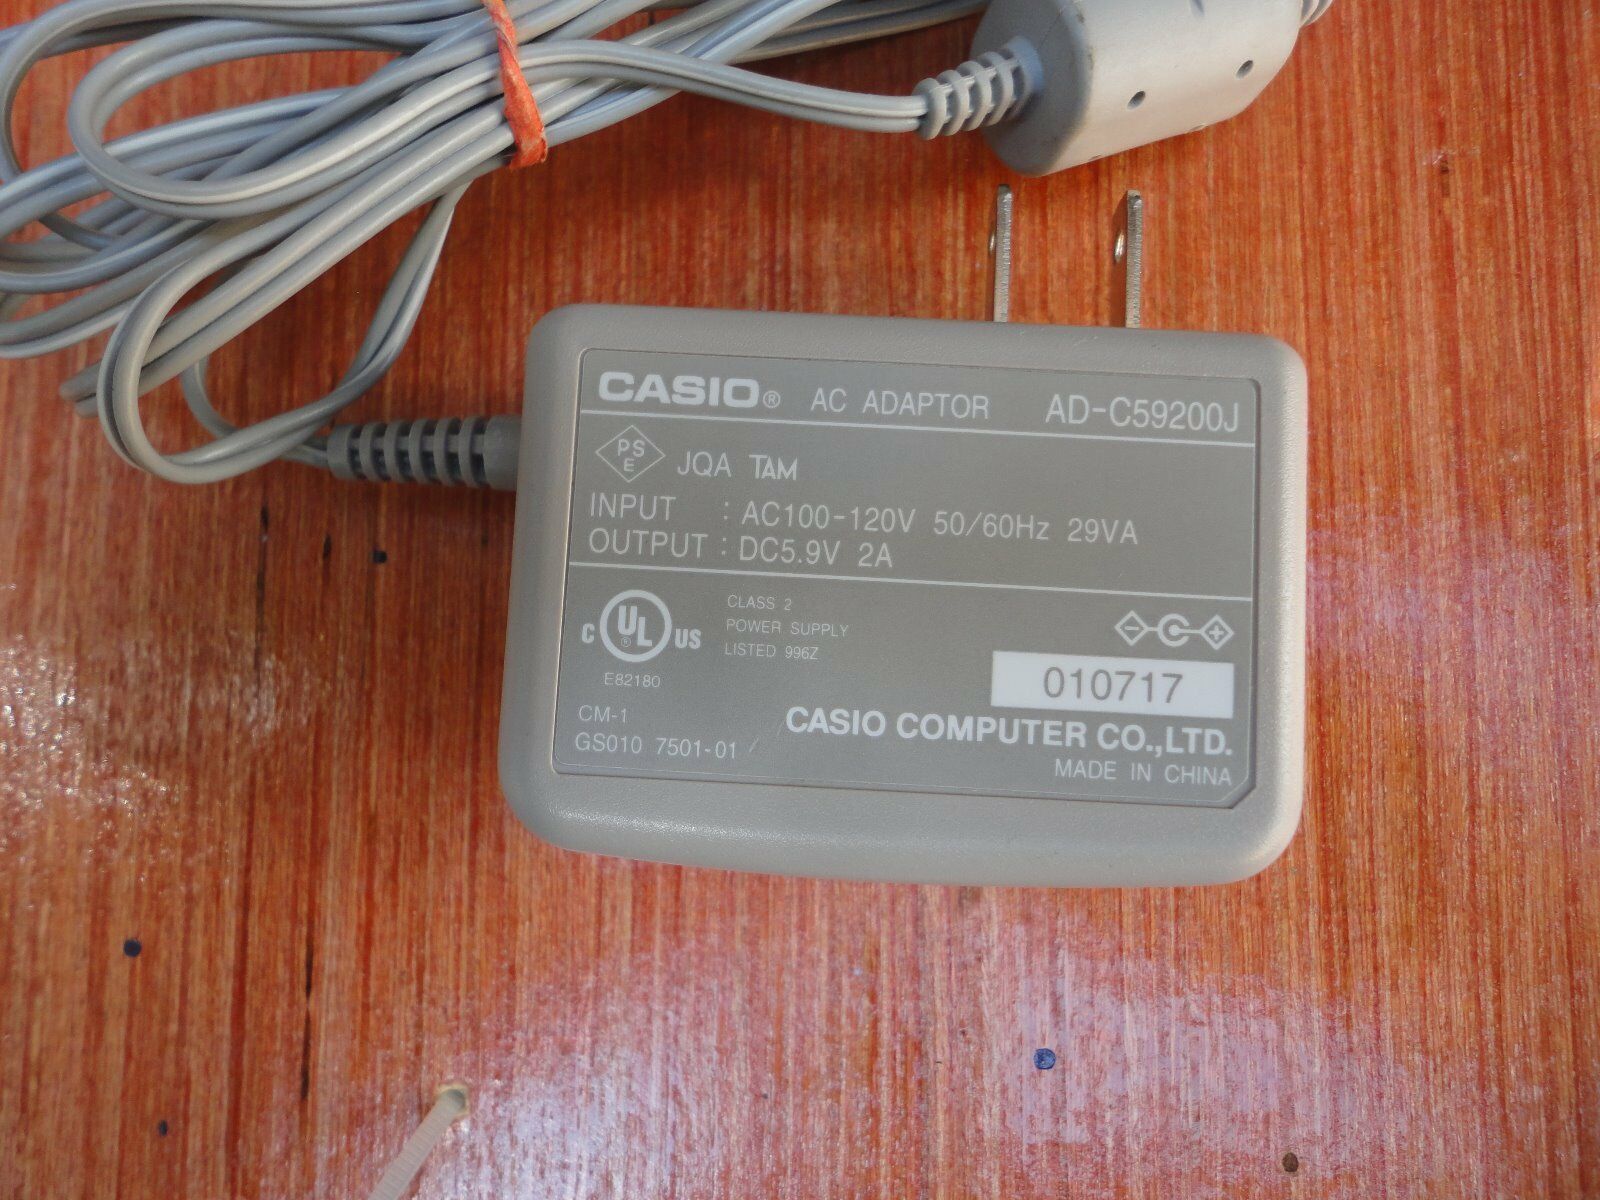 New 5.9V 2A Casio AD-C59200J Switching Power Supply AC/DC Adapter